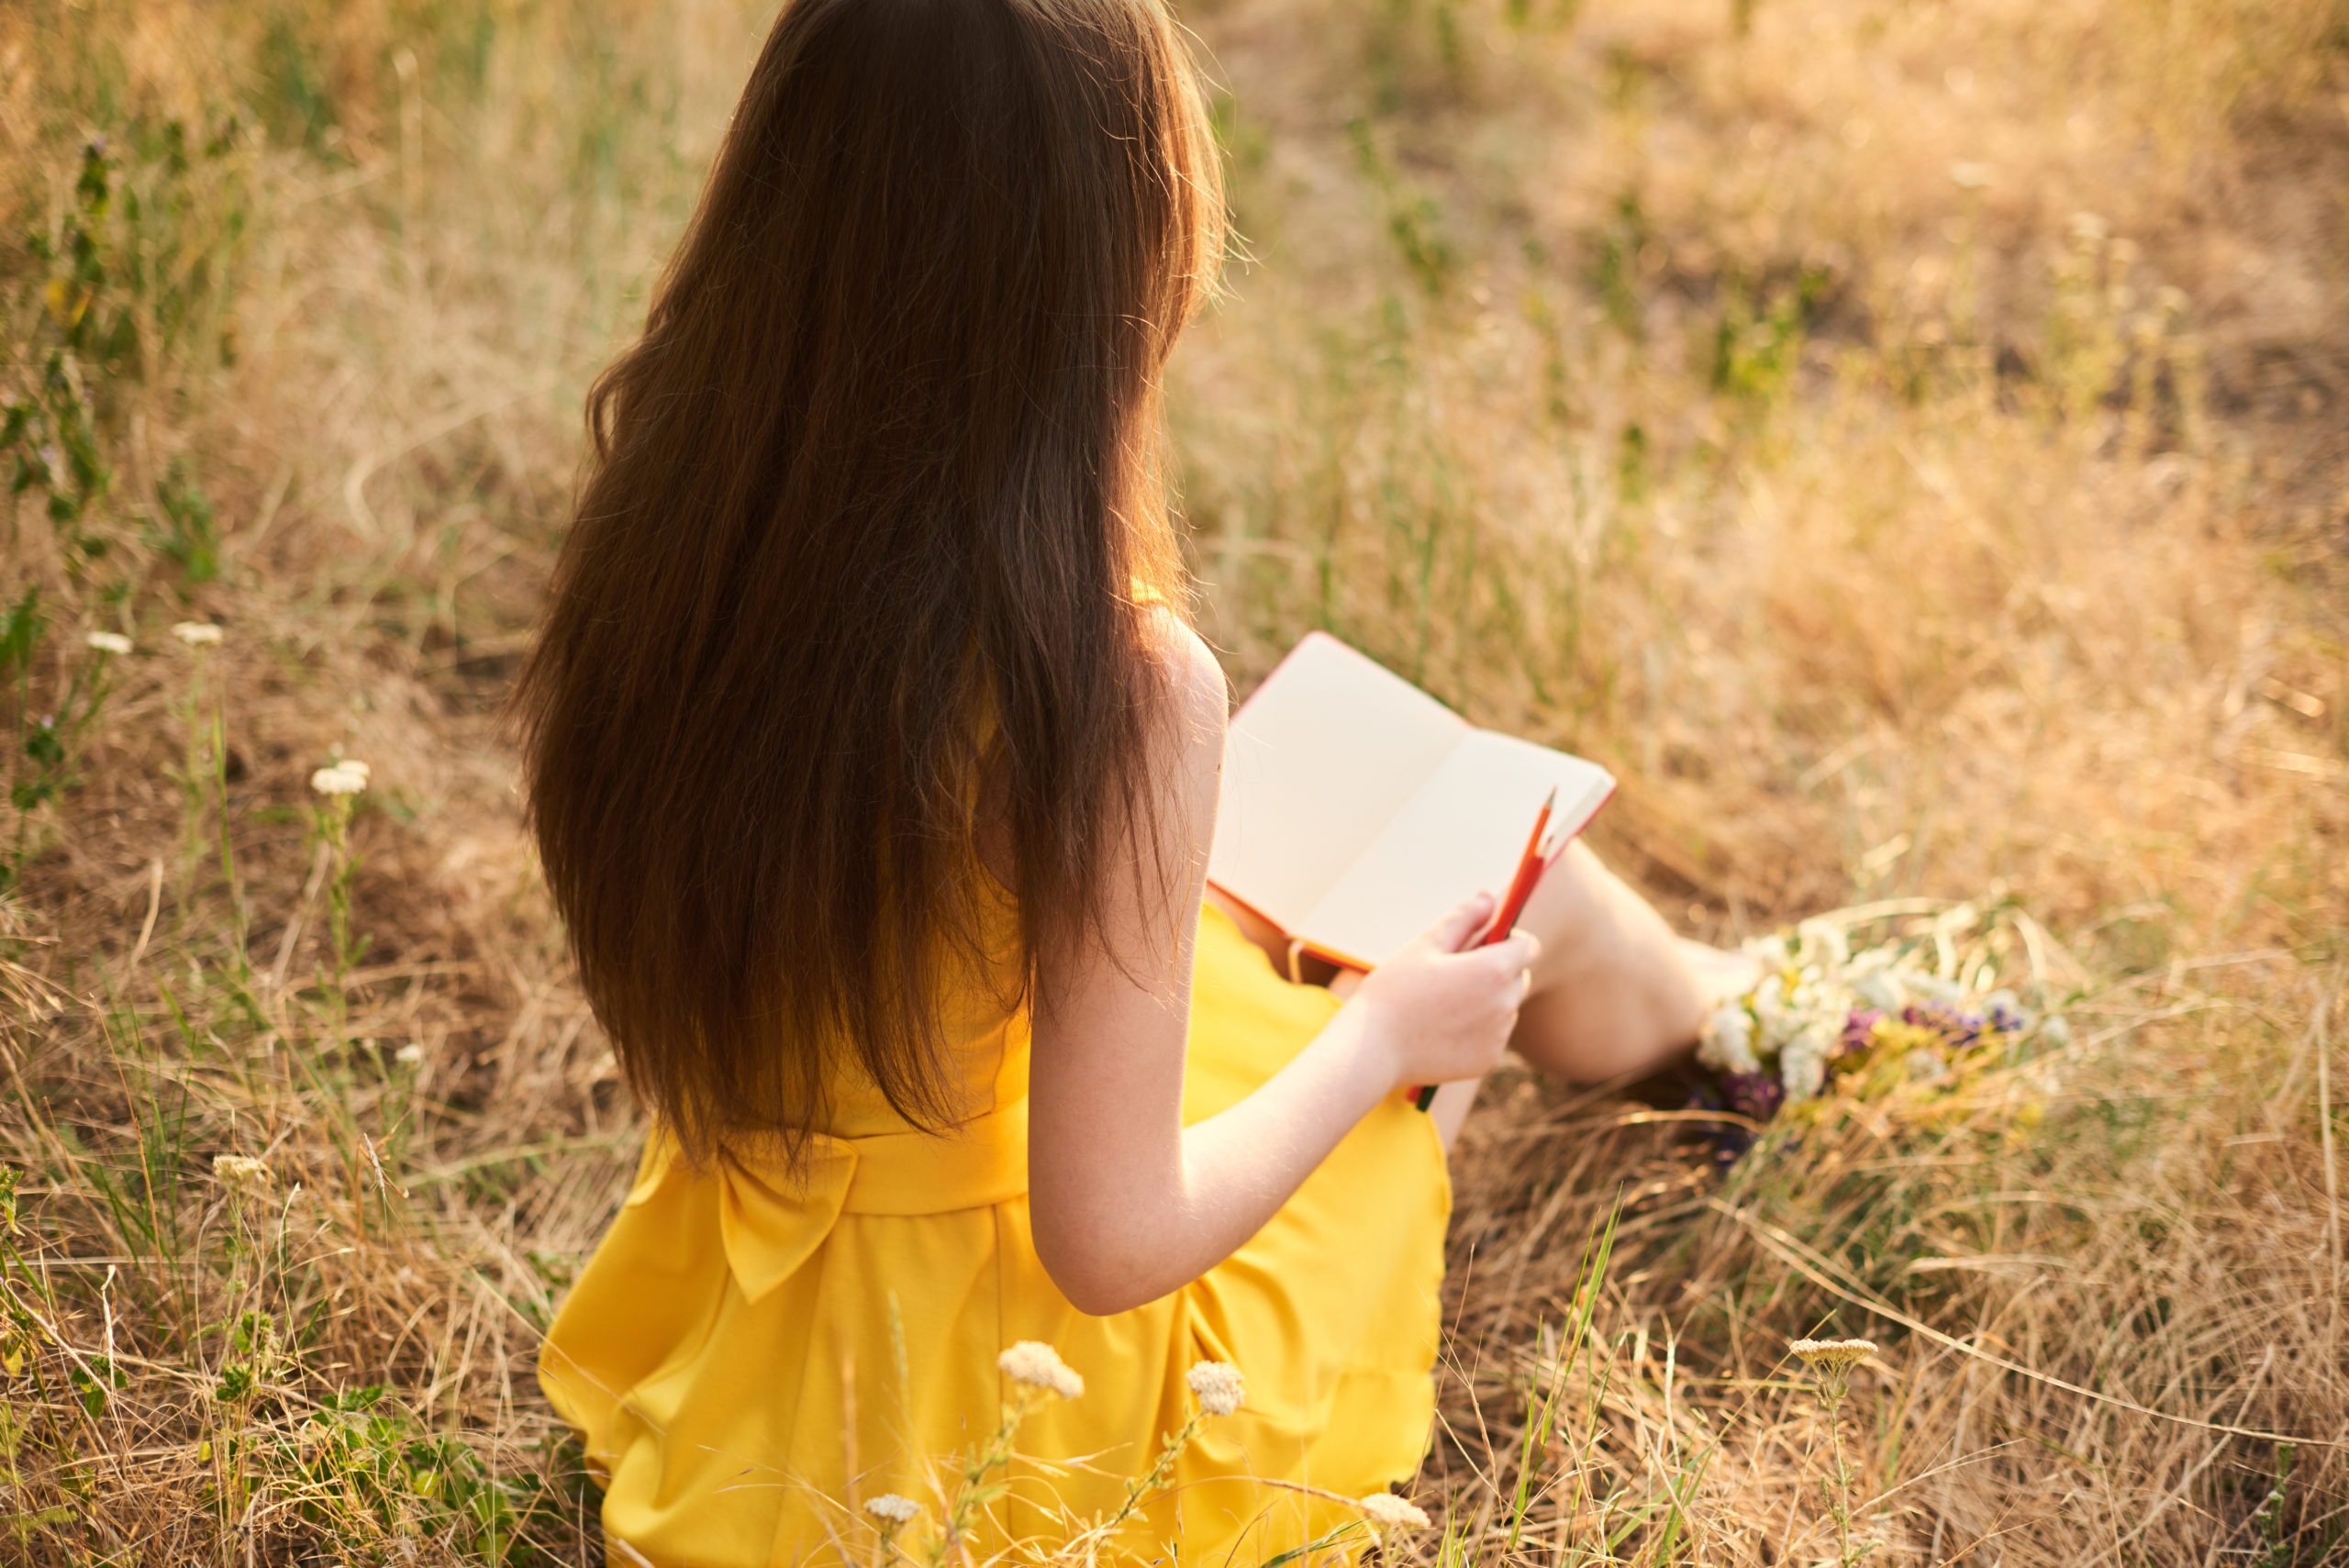 Melancholic long-haired blond girl sits with her back on the lawn with a notebook and pen.